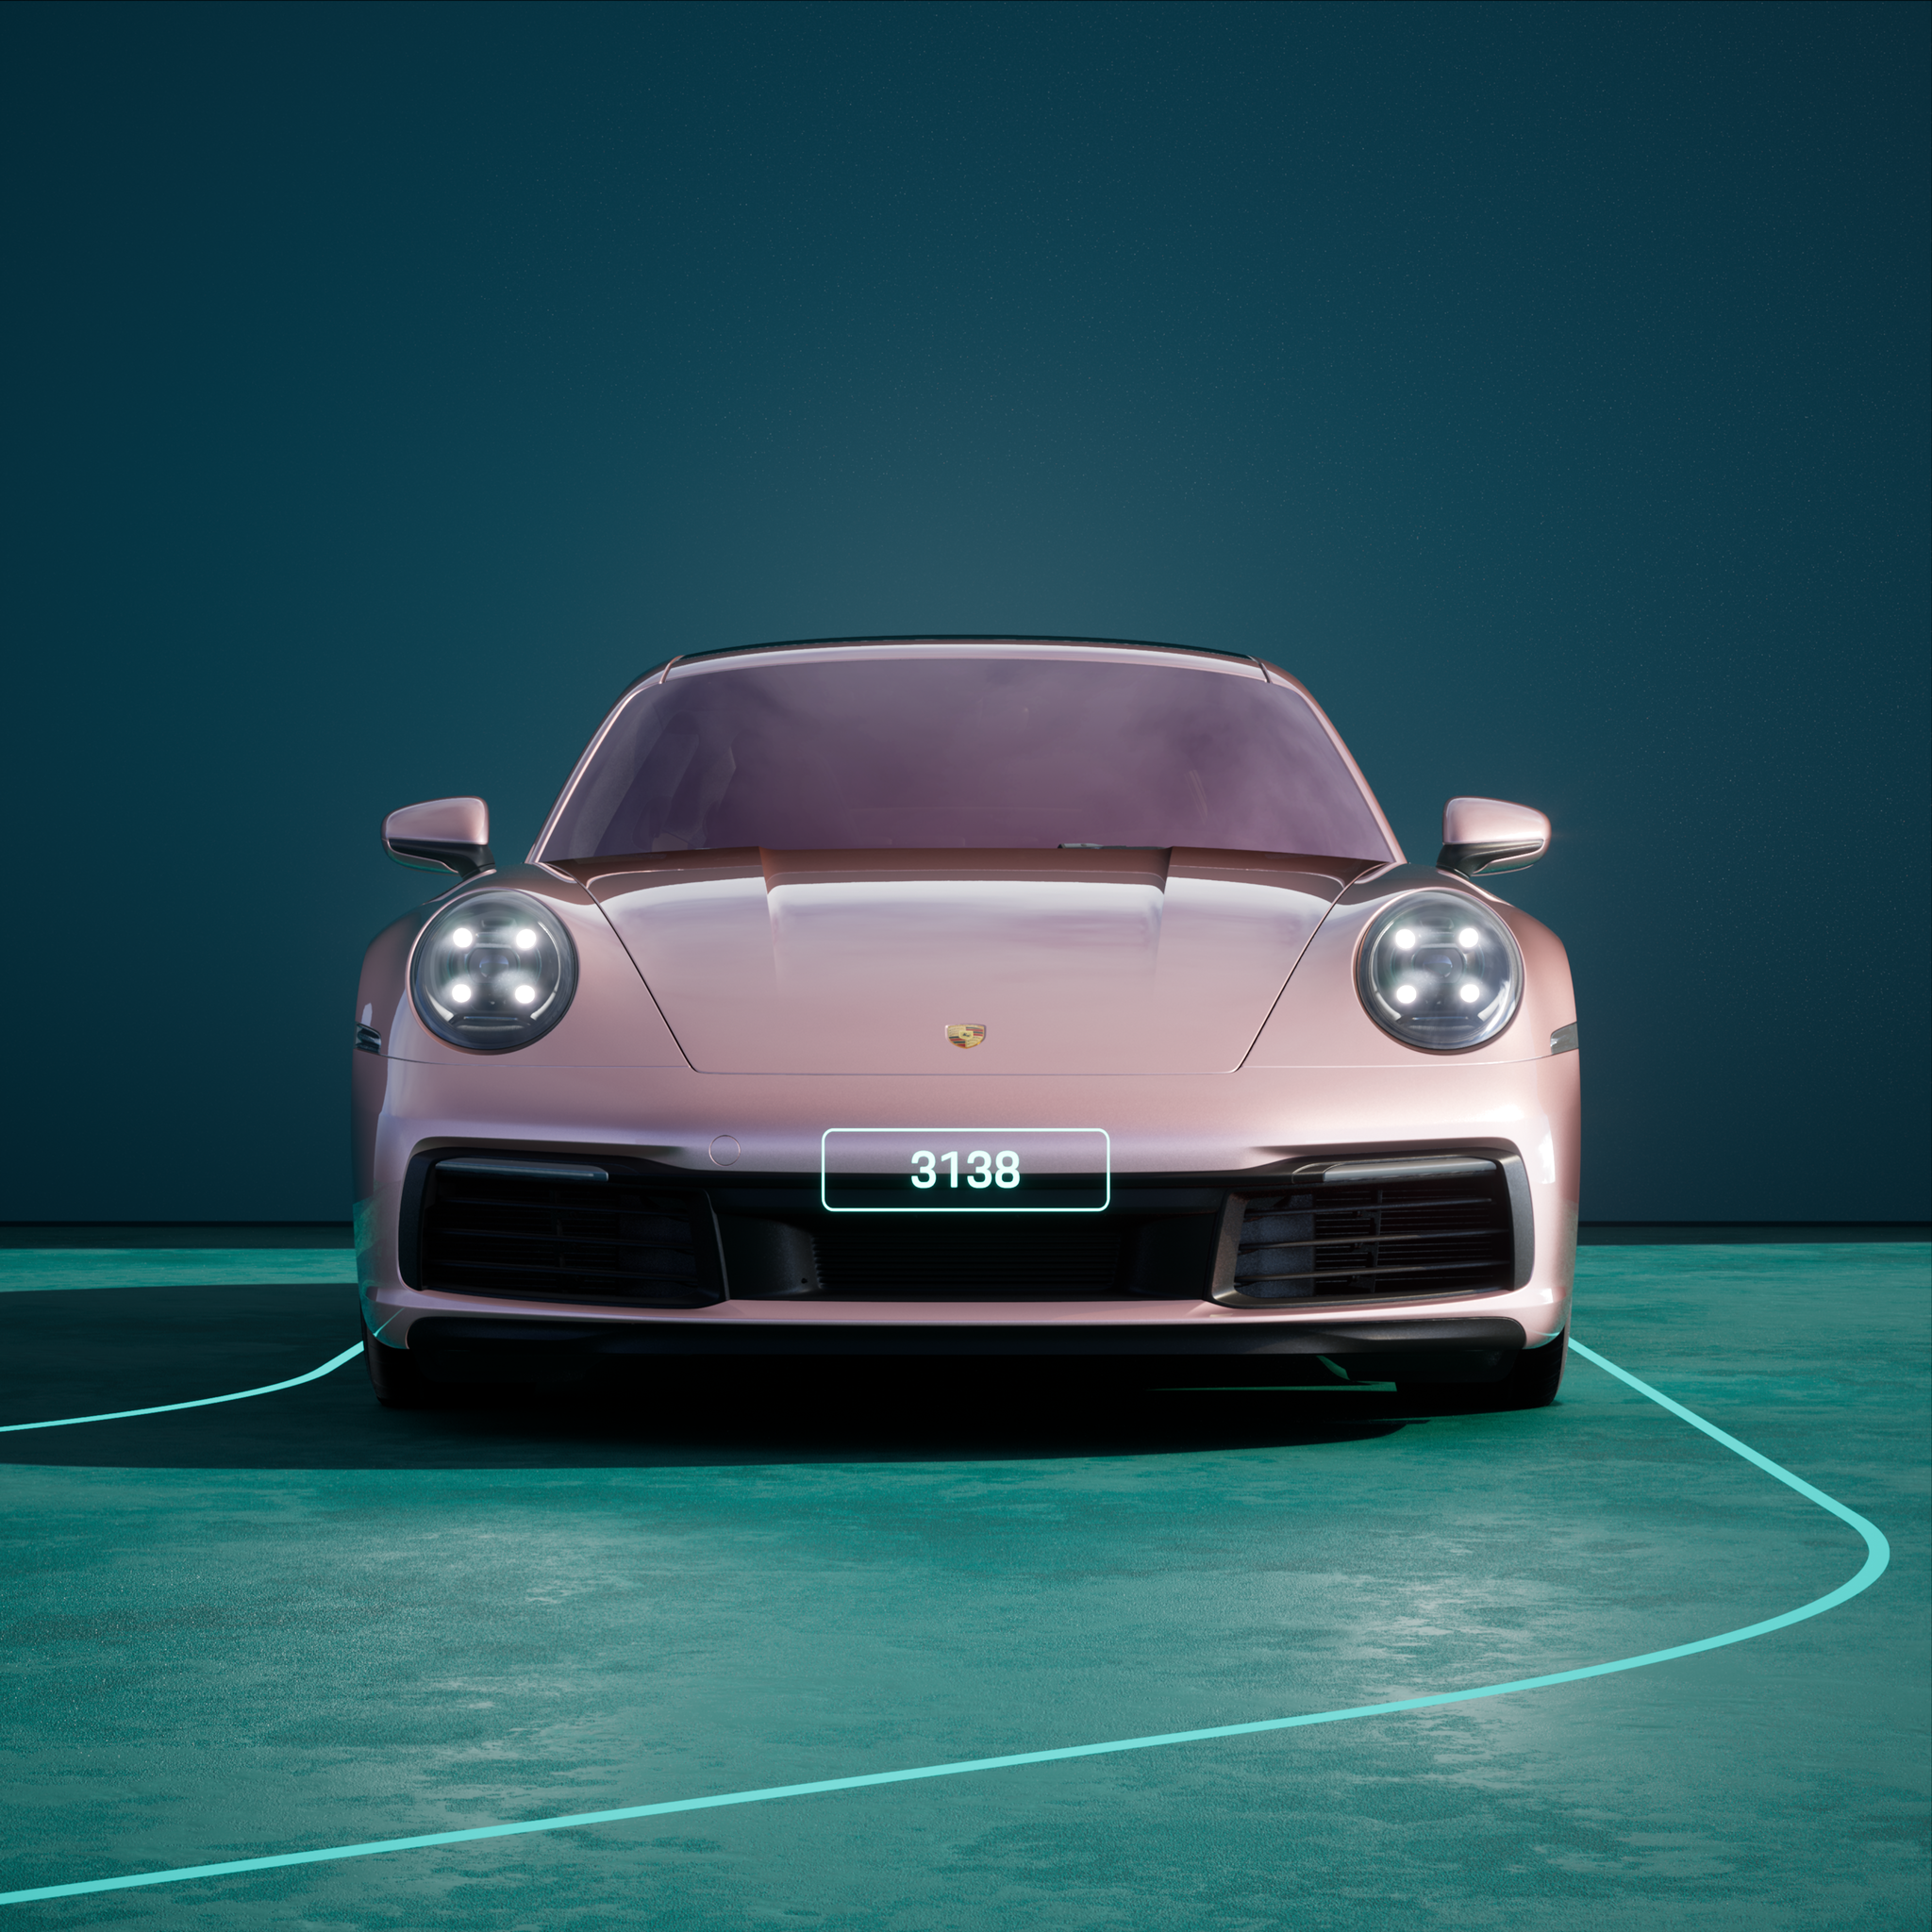 The PORSCHΞ 911 3138 image in phase